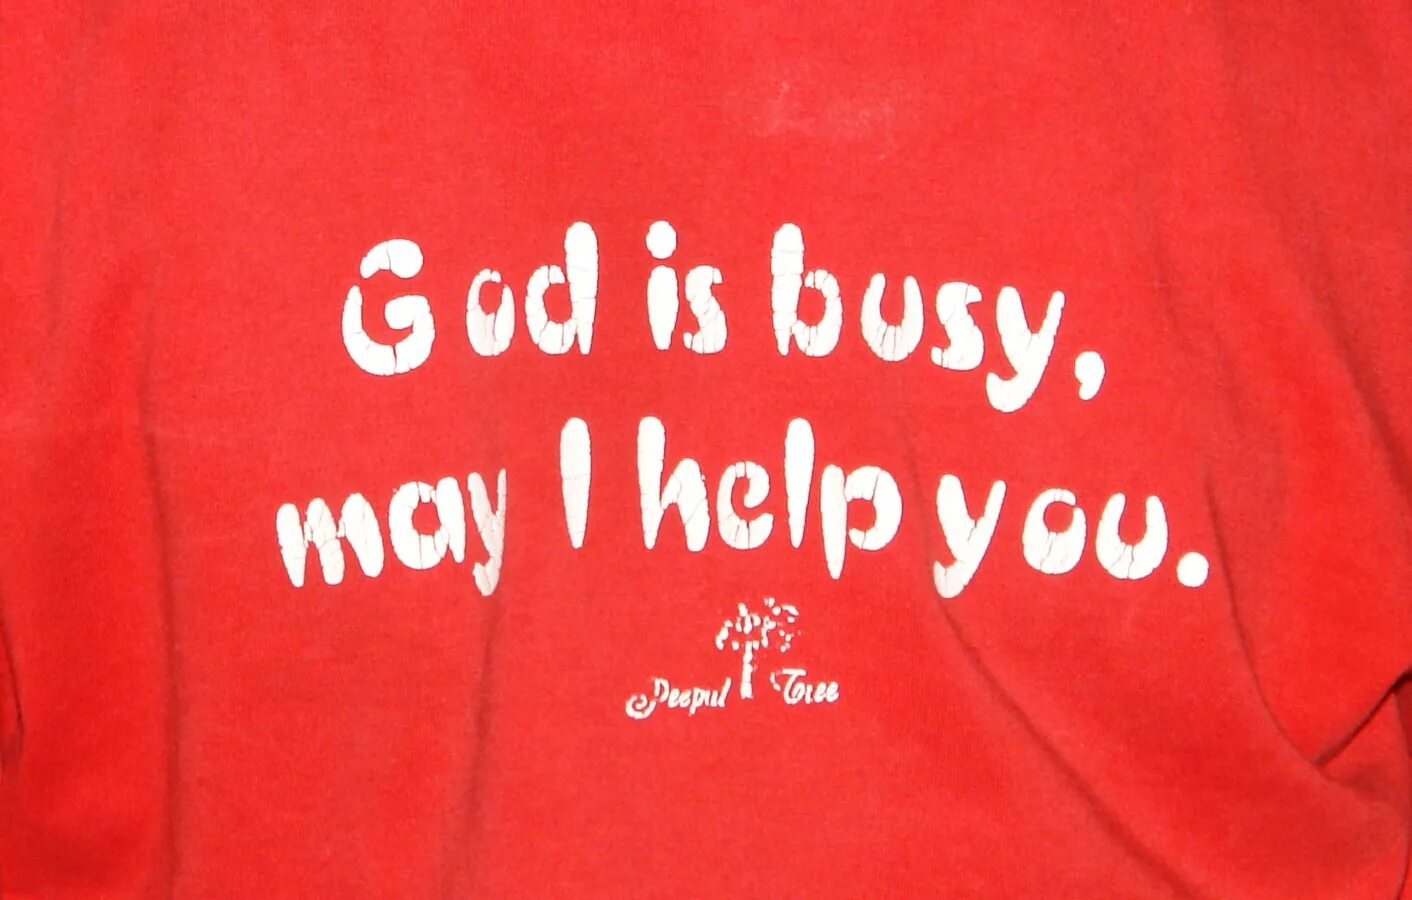 God is busy can i help you плакат. How May i help you. God is busy can i help you футболка. Куртка God is busy can i help you. I think i can help you